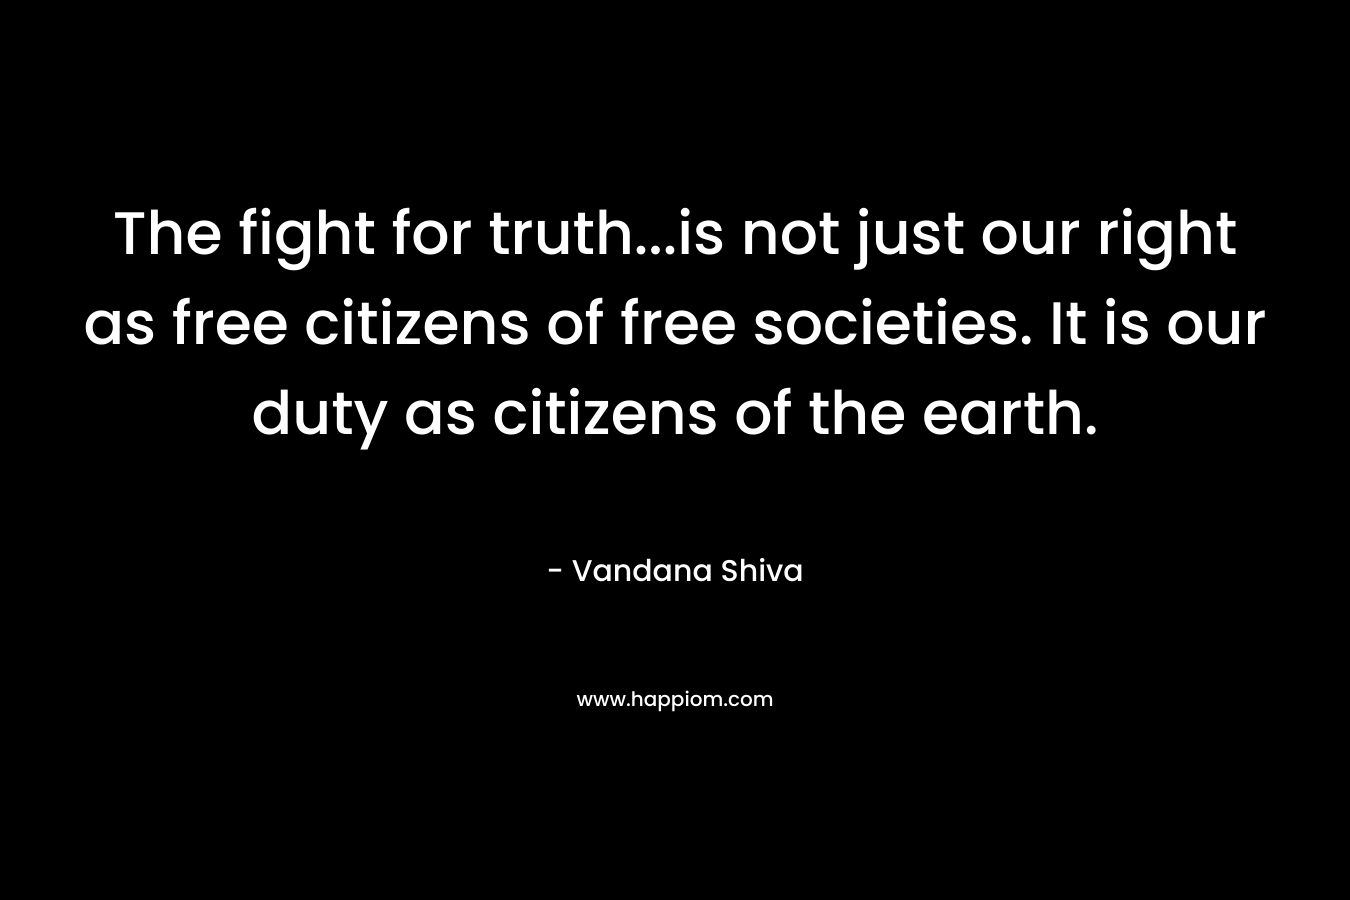 The fight for truth...is not just our right as free citizens of free societies. It is our duty as citizens of the earth.